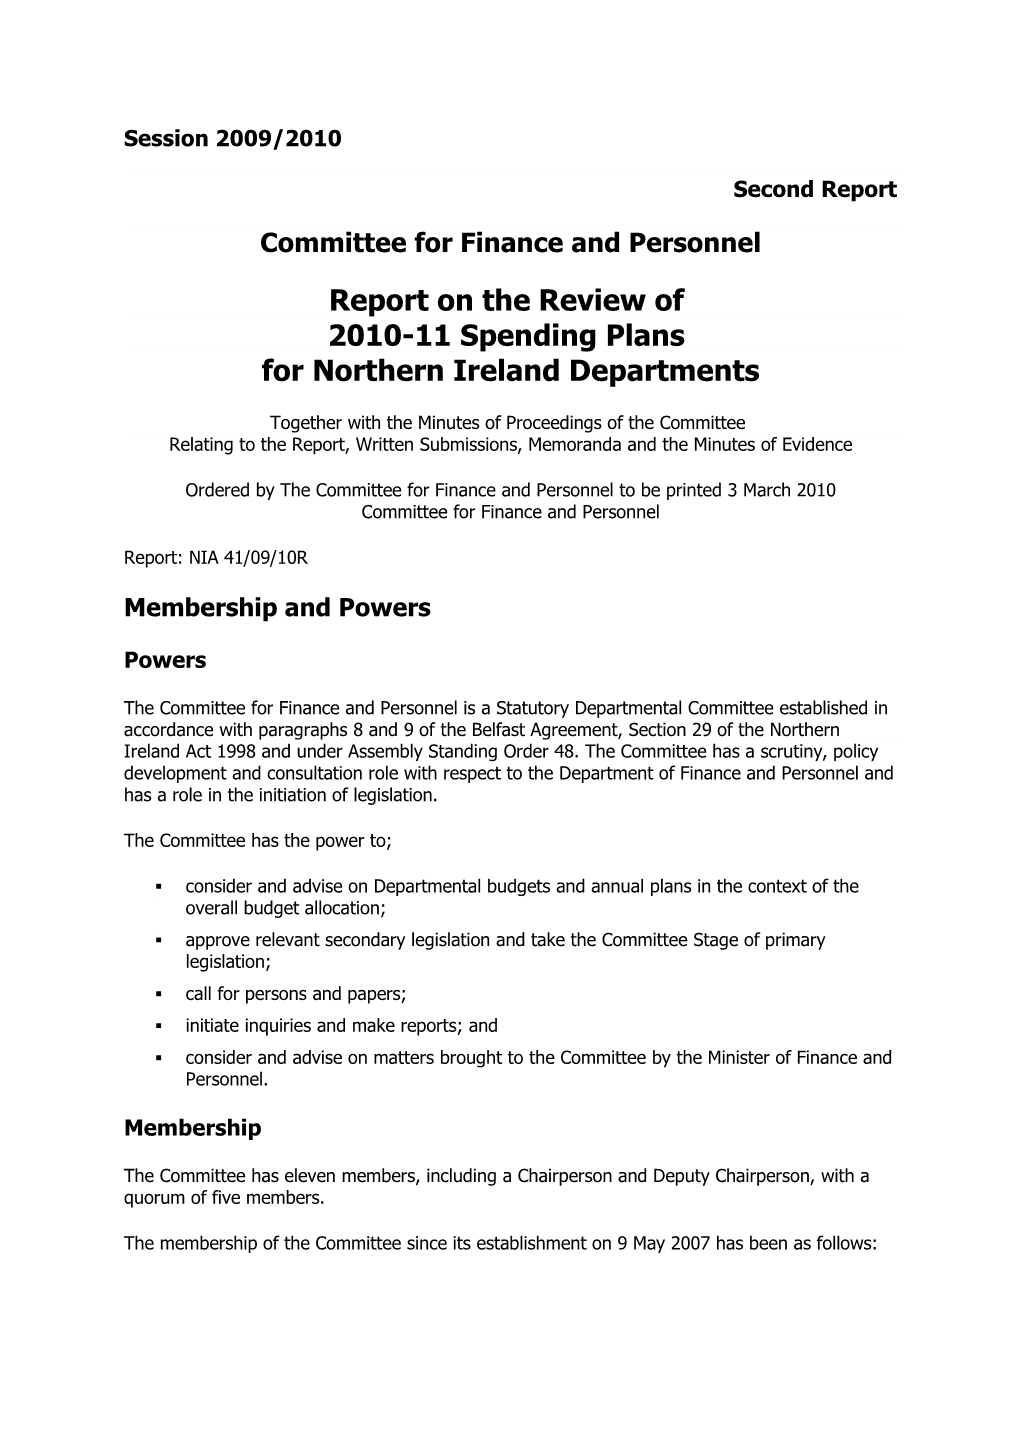 Report on the Review of 2010-11 Spending Plans for Northern Ireland Departments